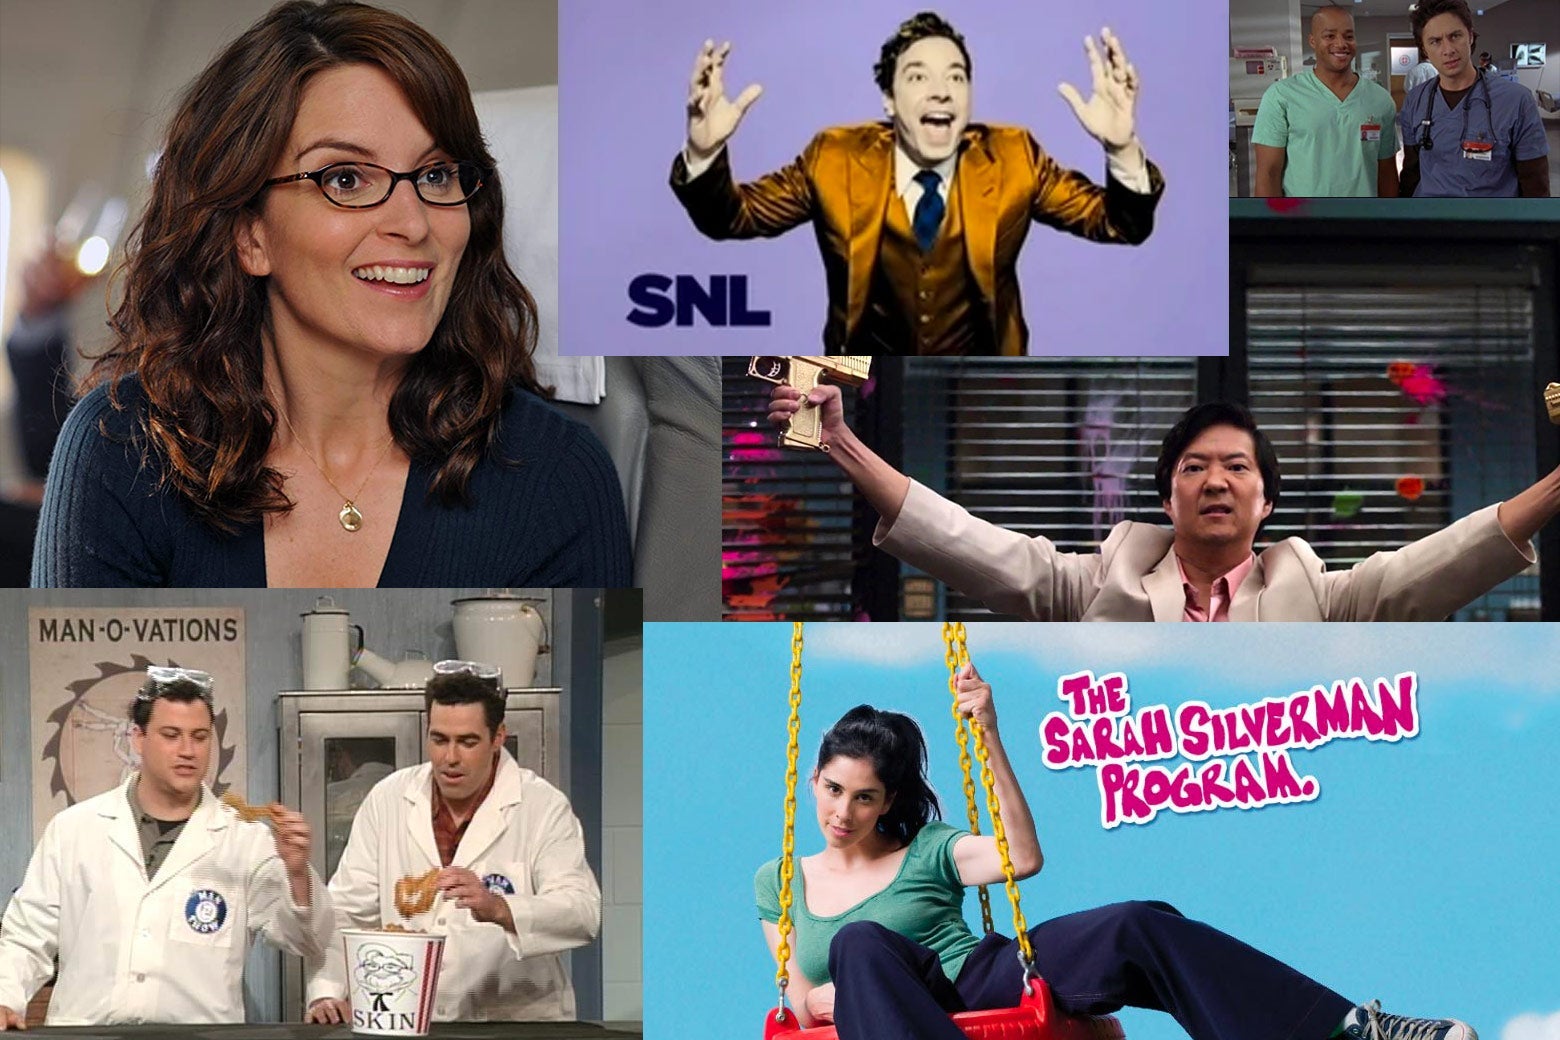 Collage of stills from 30 Rock, SNL, Community, Scrubs, The Sarah Silverman Program, and The Man Show